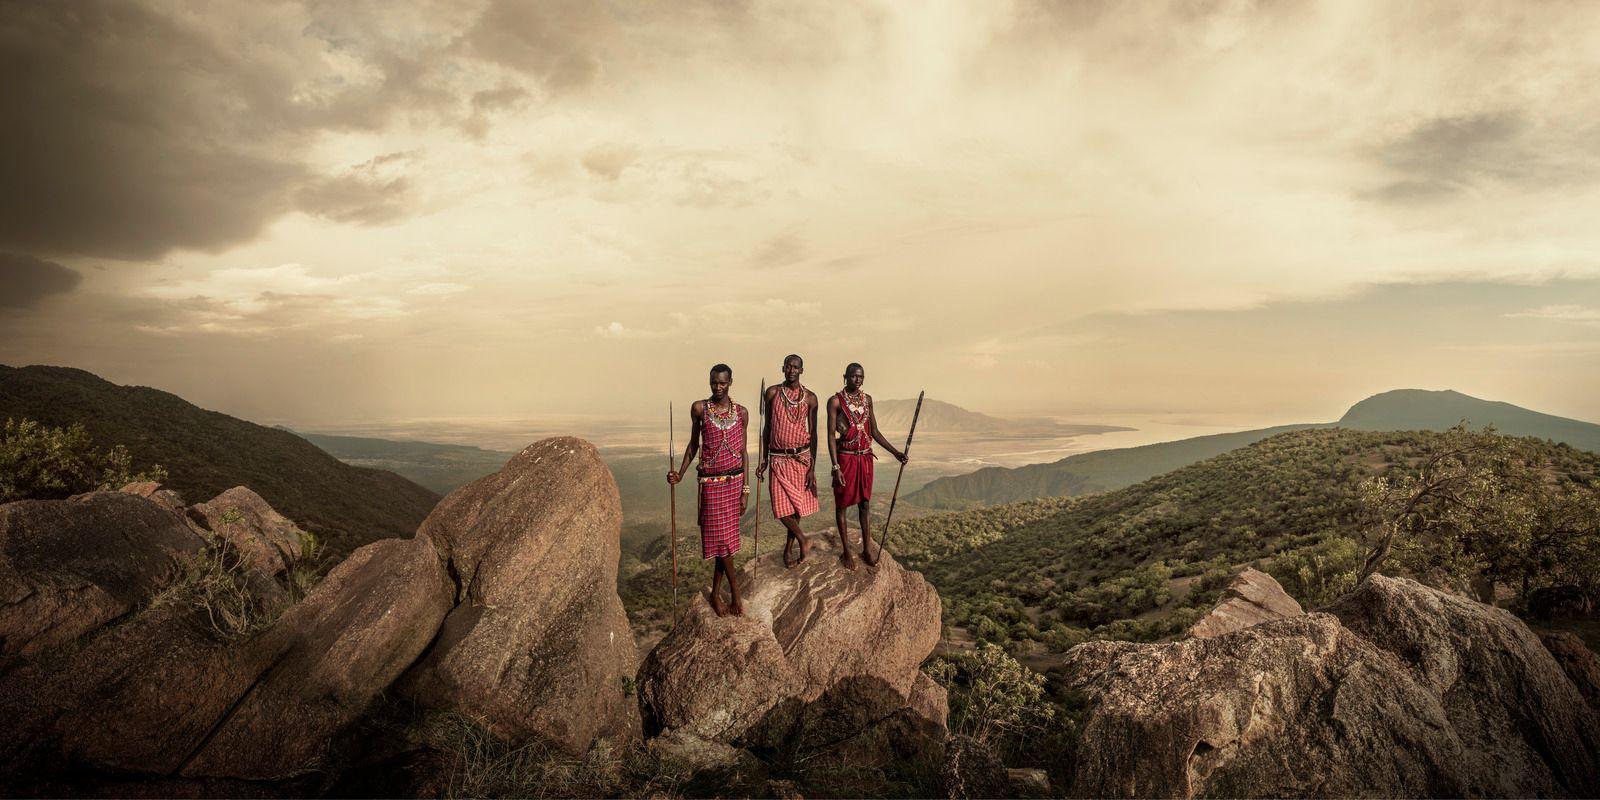 All available sizes & editions for each size of this photograph:
24.41" X 43.31" Edition of 9
39.37" X 70.87" Edition of 6
55.12" X 102.36" Edition of 3

Maasai, Nguruman Escarpment, Kenya, December 2017

When the Maasai migrated from the Sudan in